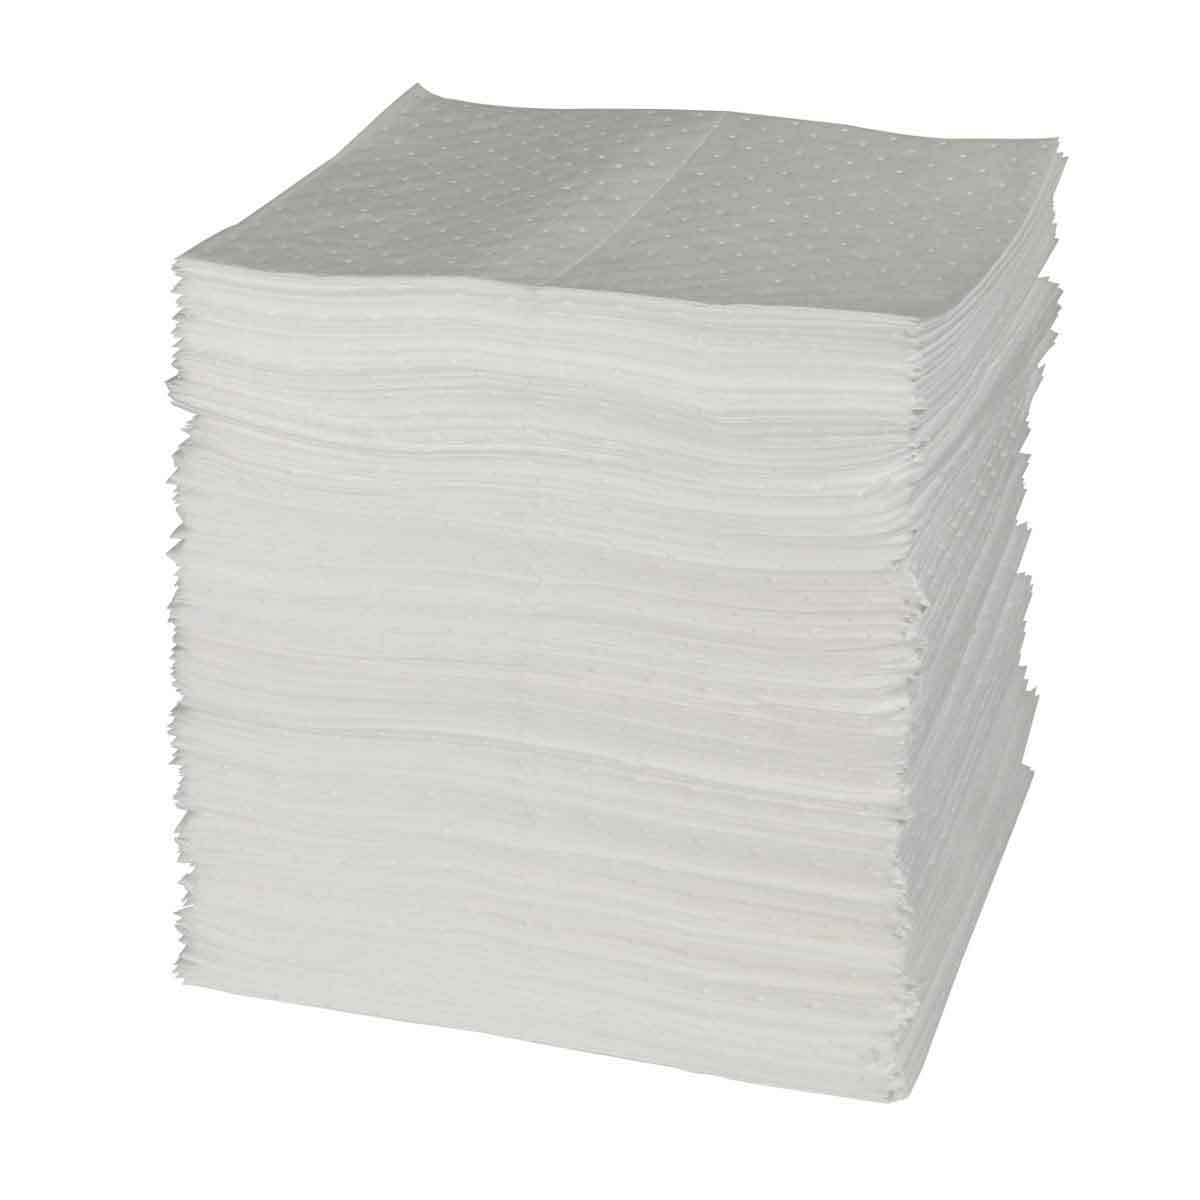 Oil Absorbent Pads Selection Guide